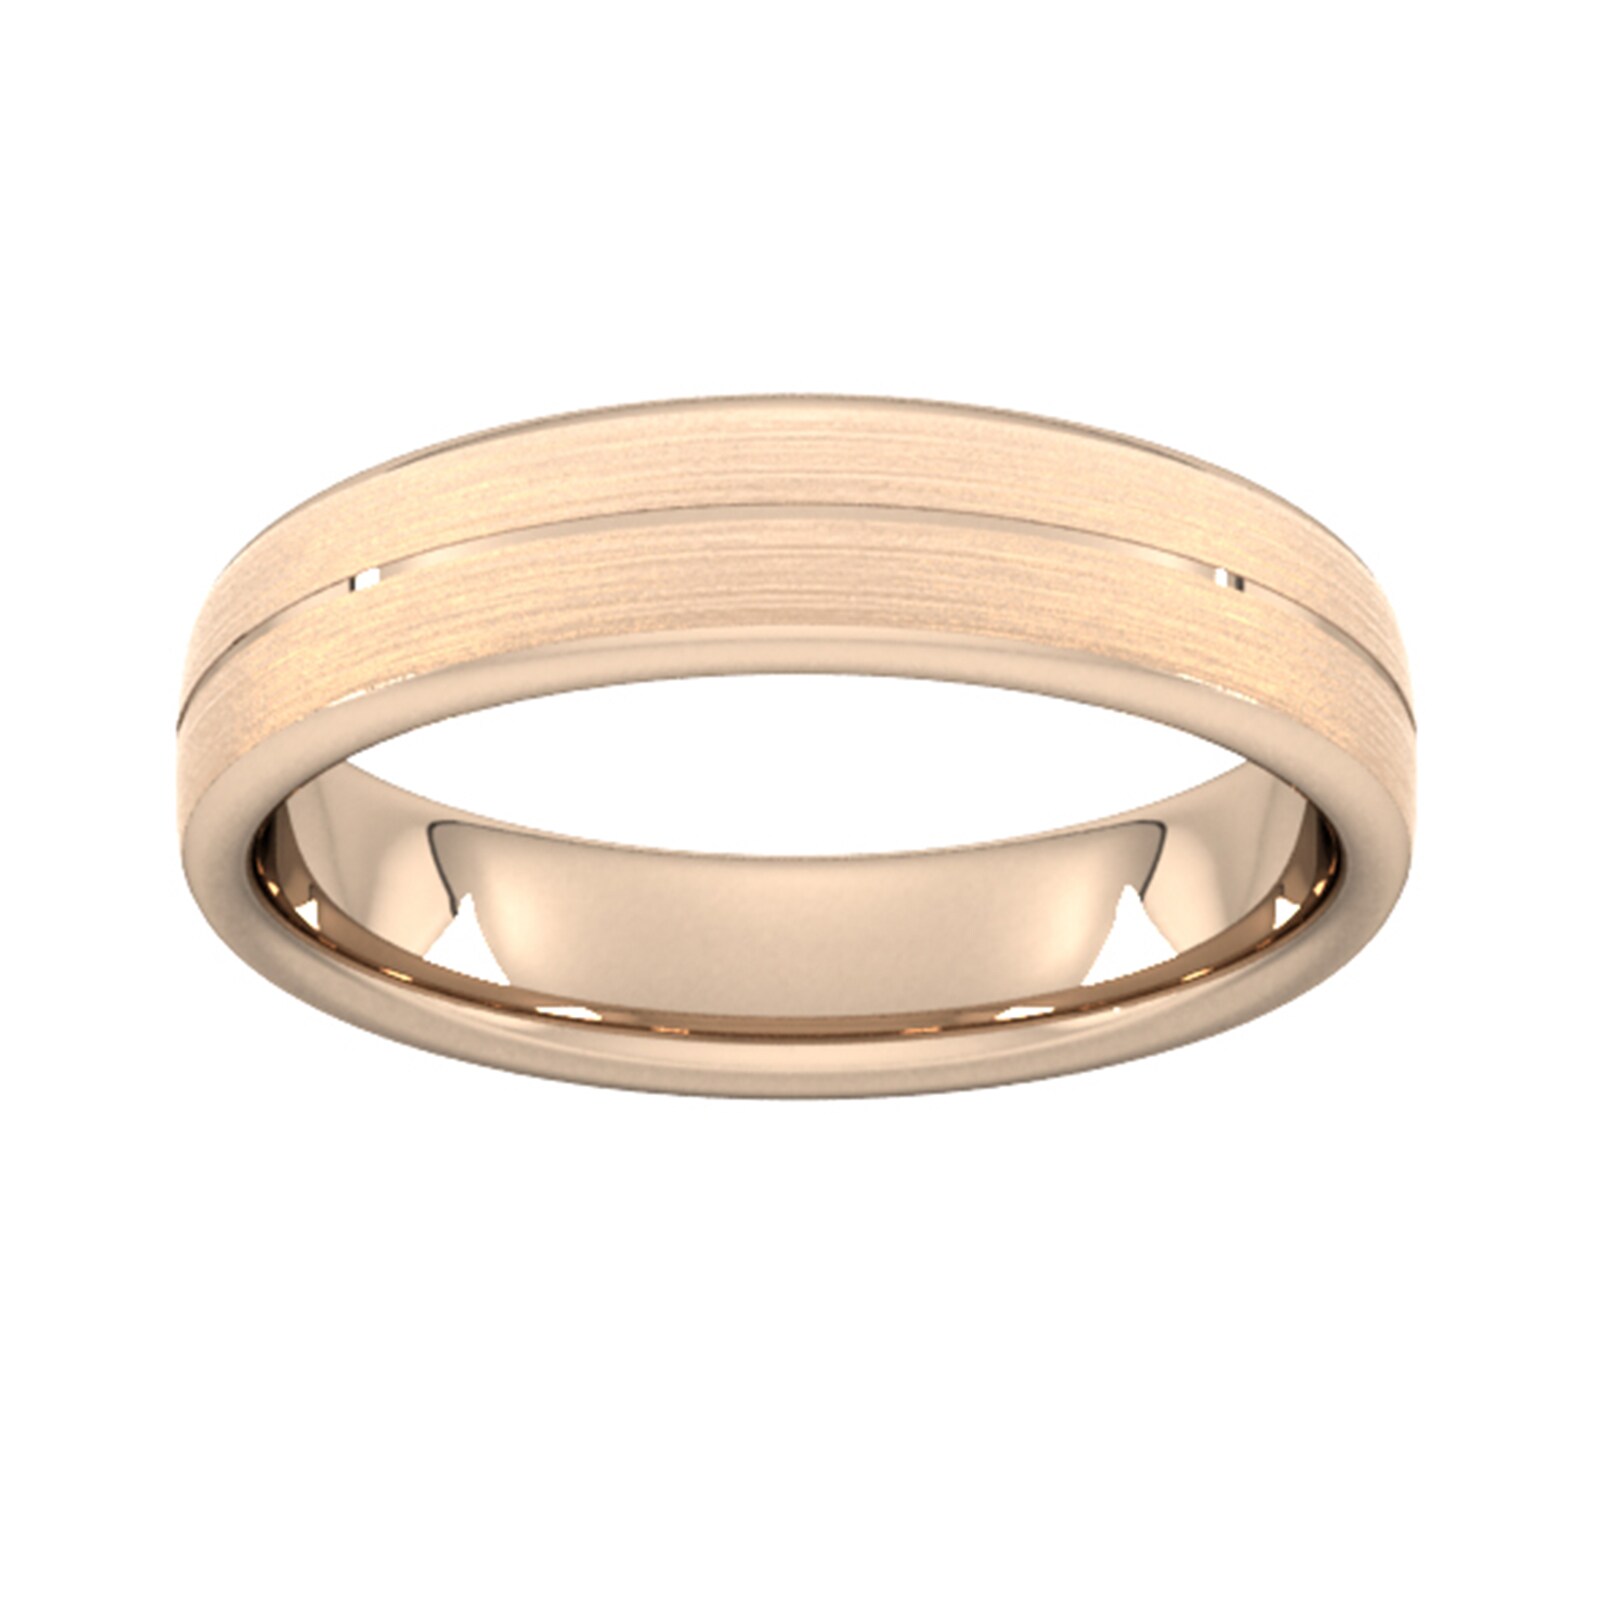 5mm D Shape Standard Centre Groove With Chamfered Edge Wedding Ring In 18 Carat Rose Gold - Ring Size O